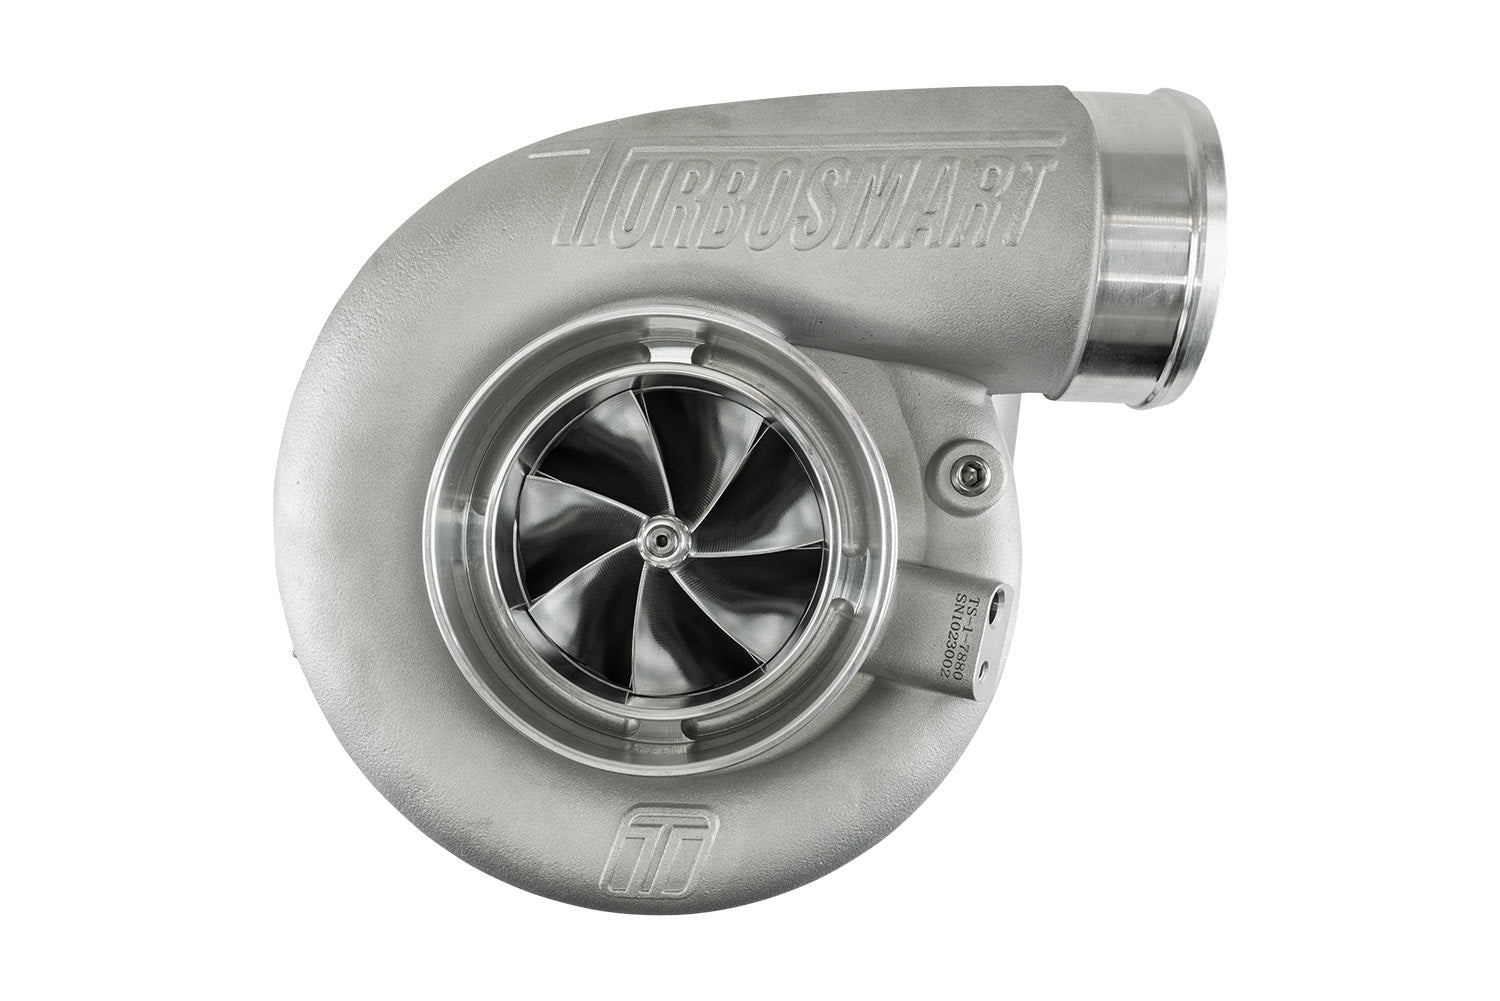 TS-2 Performance Turbocharger (Water Cooled) 6466 V-Band 0.82AR Externally Wastegated - 0